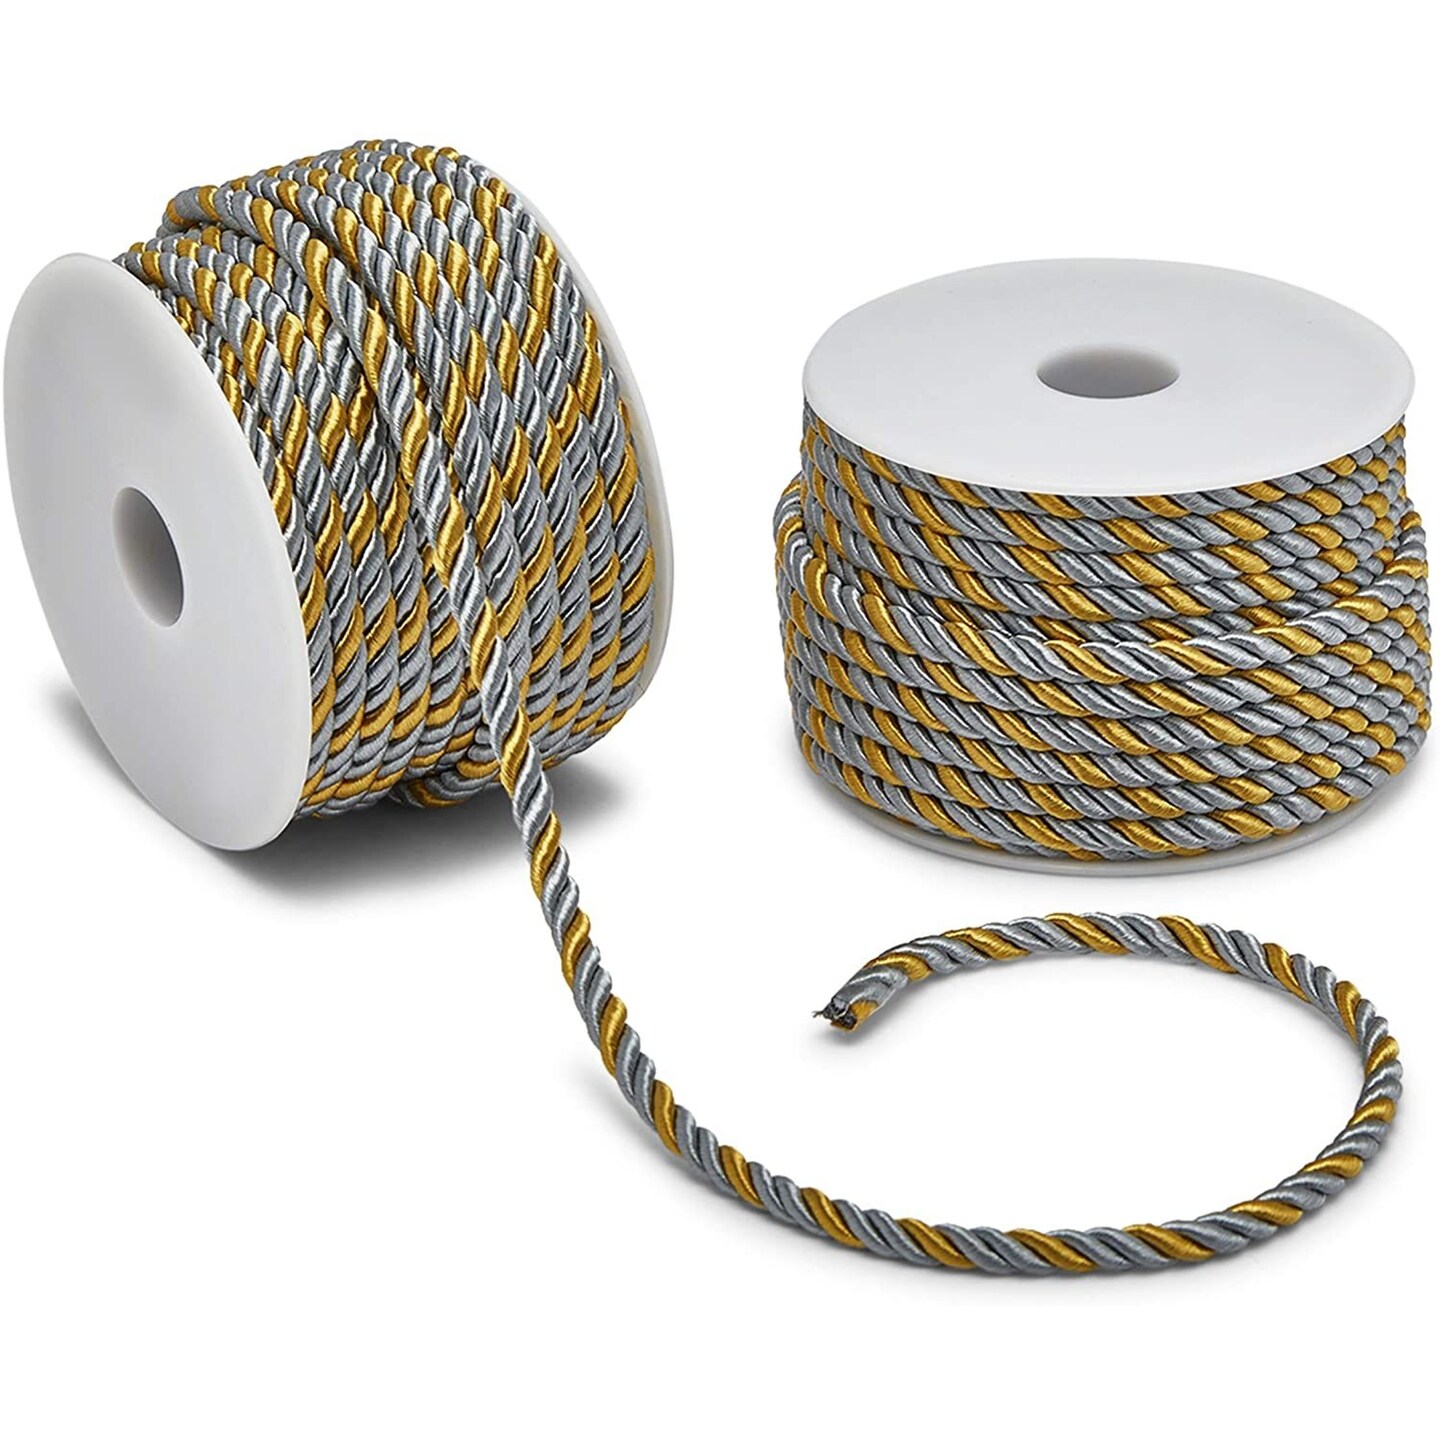 Silver and Gold Nylon Twisted Cord Trim Rope for Crafts (36 Yards